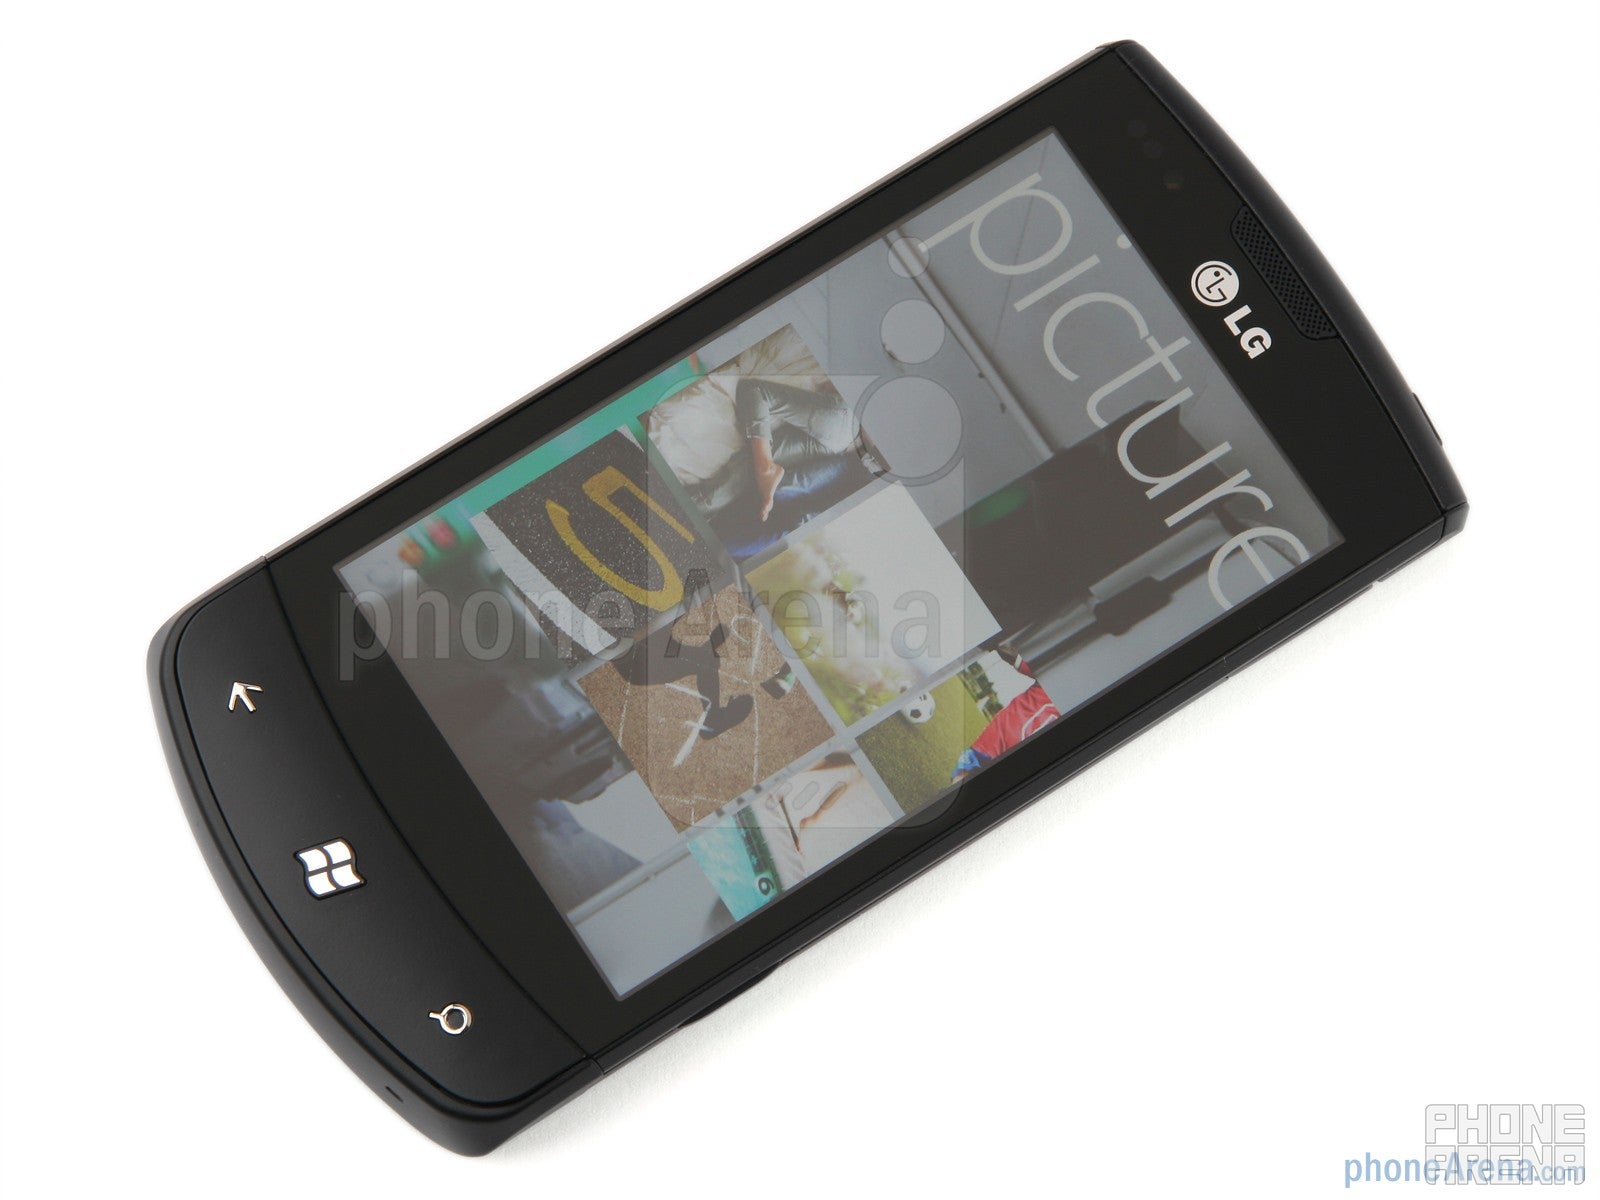 The LG Optimus 7 offers a 3.8-inch screen - LG Optimus 7 Review